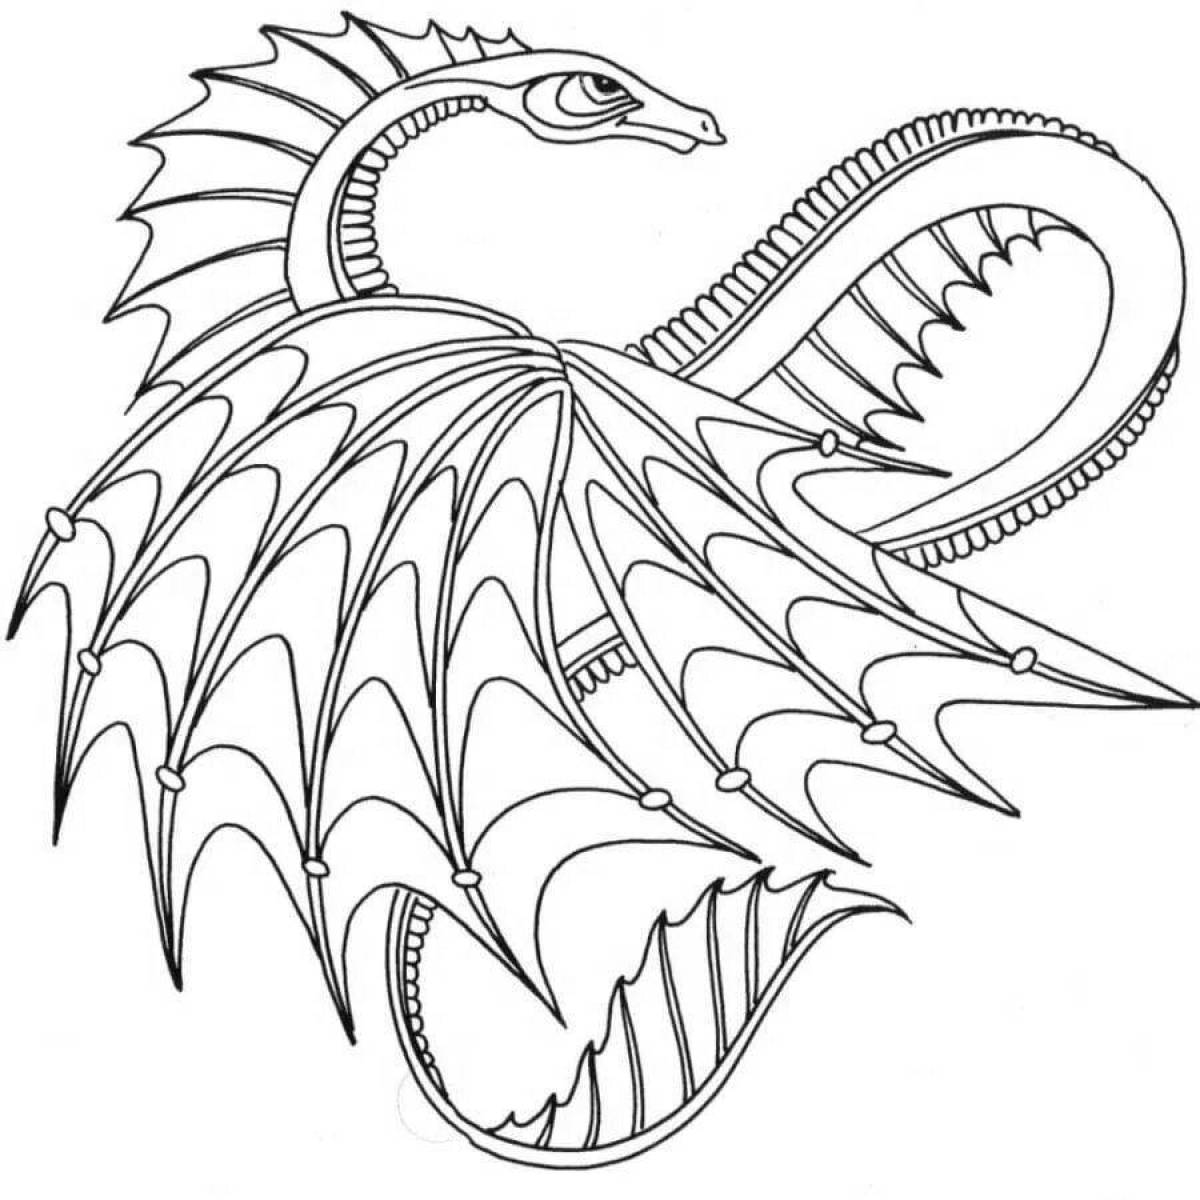 Great coloring dragon with wings